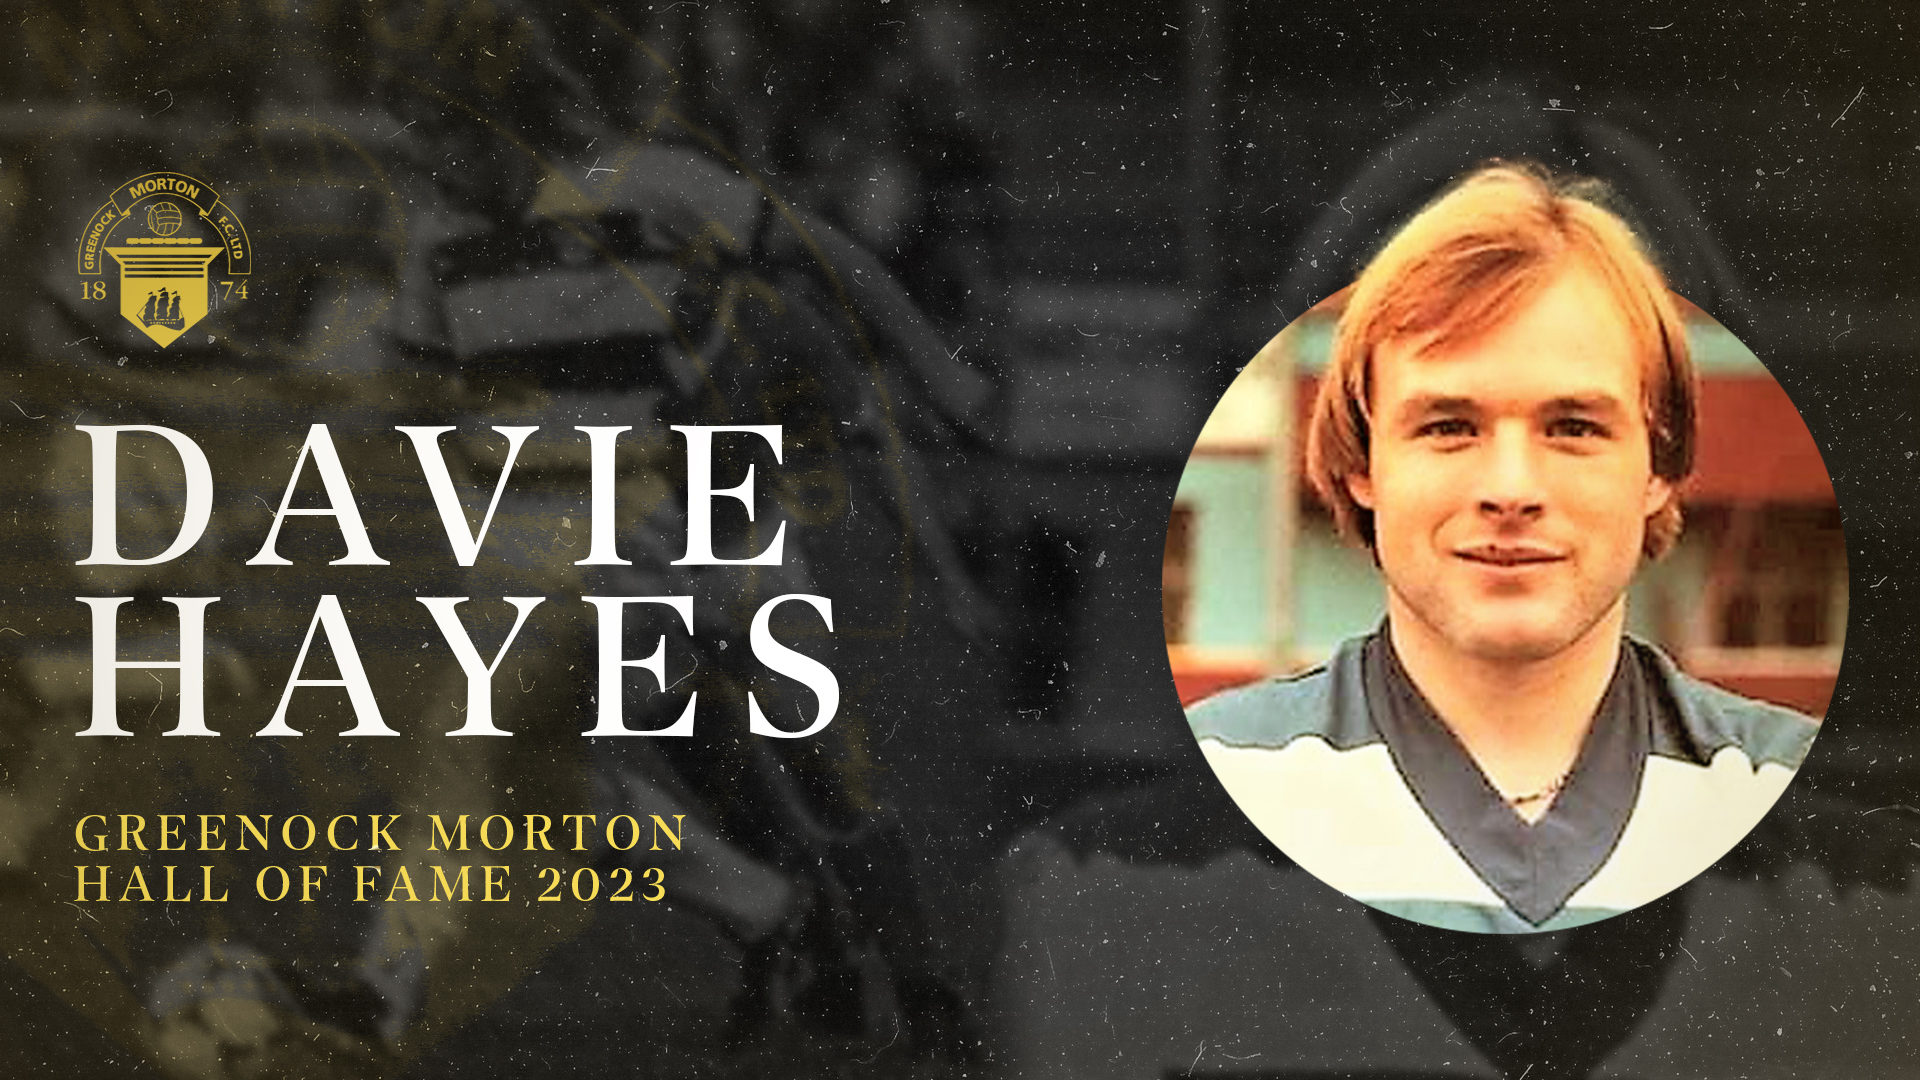 Morton fan favourite Davie Hayes to join club hall of fame